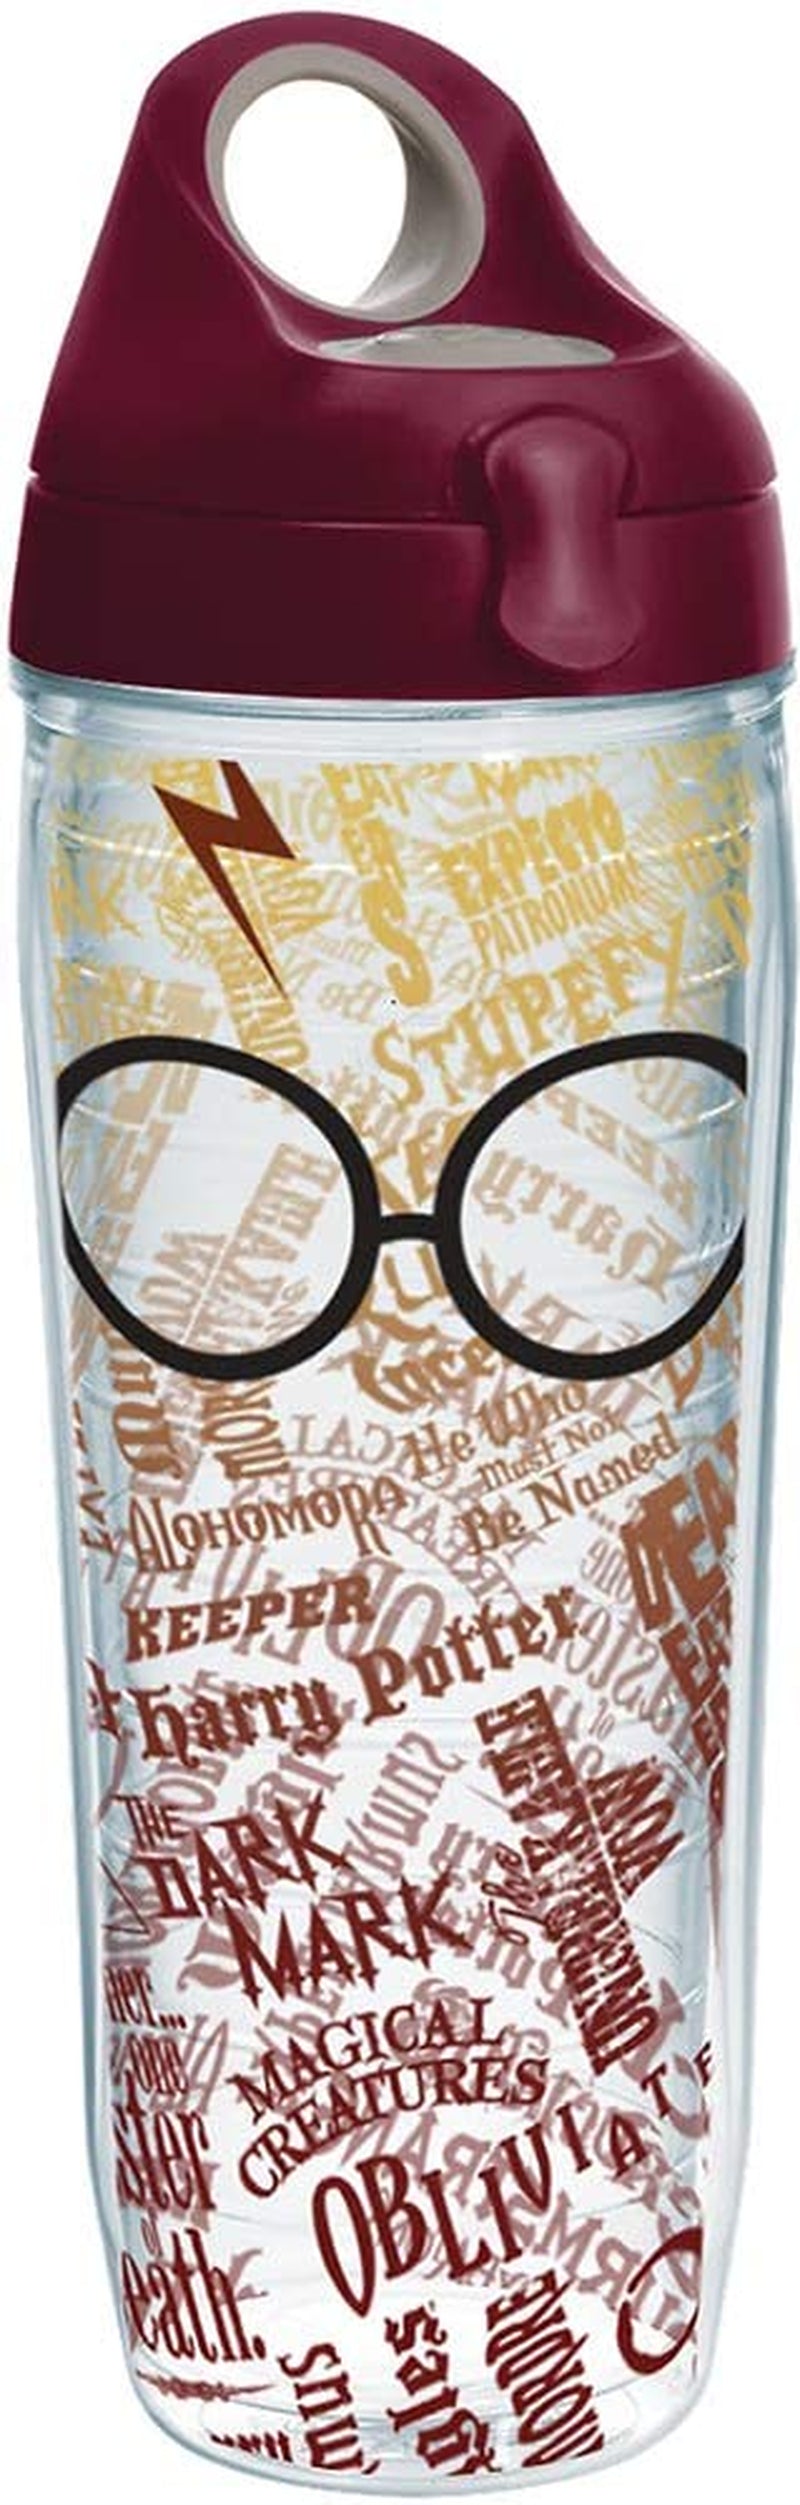 Tervis Made in USA Double Walled Harry Potter - Glasses and Scar Insulated Tumbler Cup Keeps Drinks Cold & Hot, 16Oz Mug, Classic Home & Garden > Kitchen & Dining > Tableware > Drinkware Tervis Classic 24oz Water Bottle 